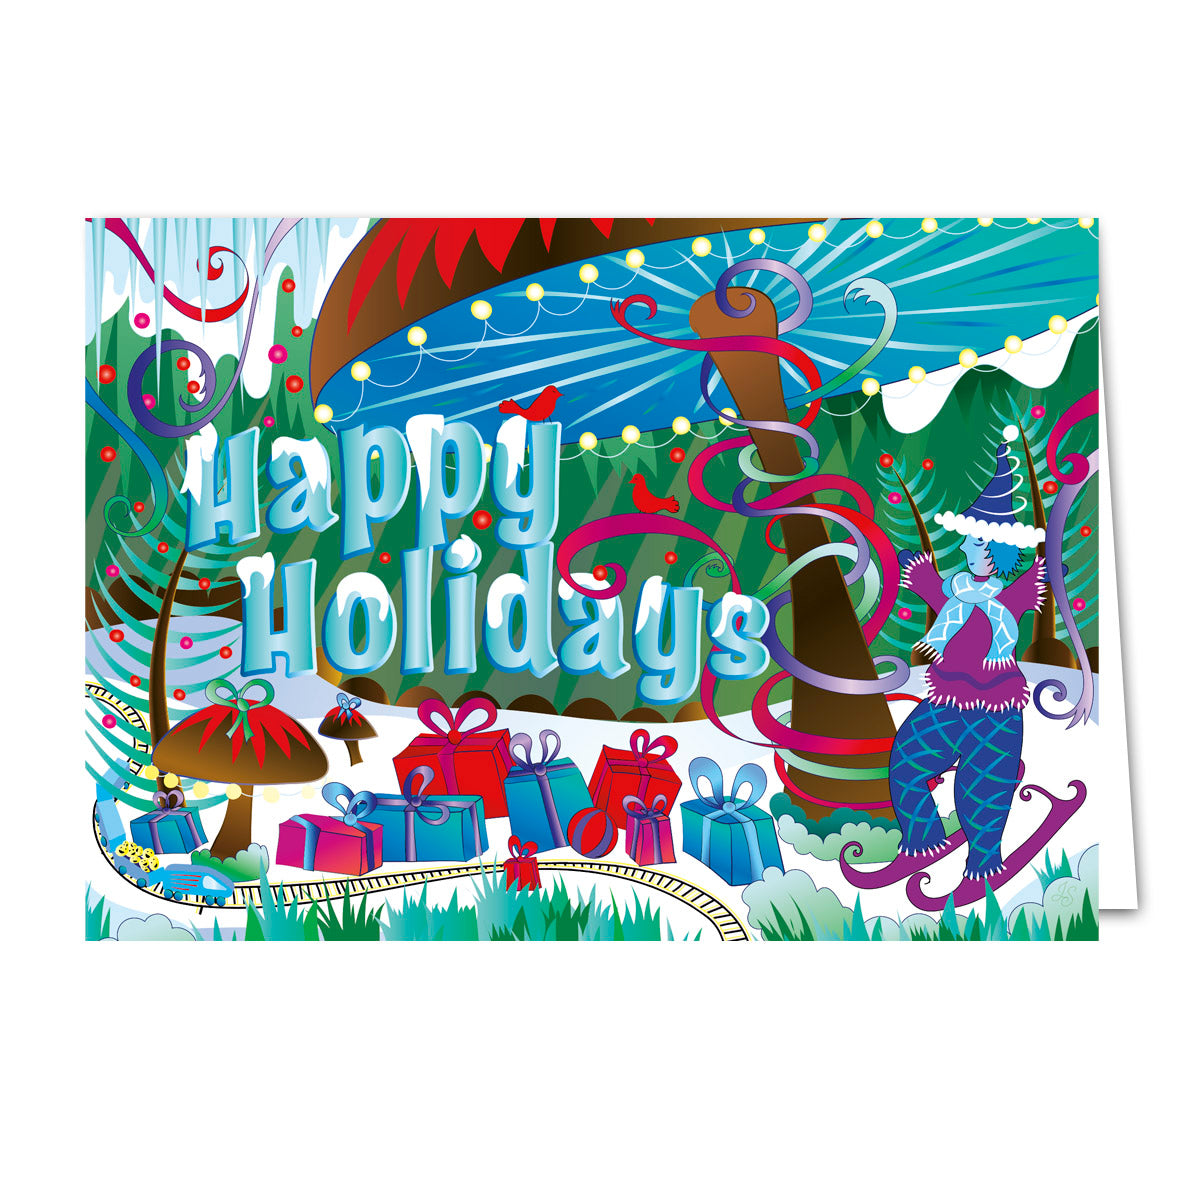 mockup for greeting card with digital design showing A happy elf celebrates the season with gifts of magic and the phrase "Happy Holidays"